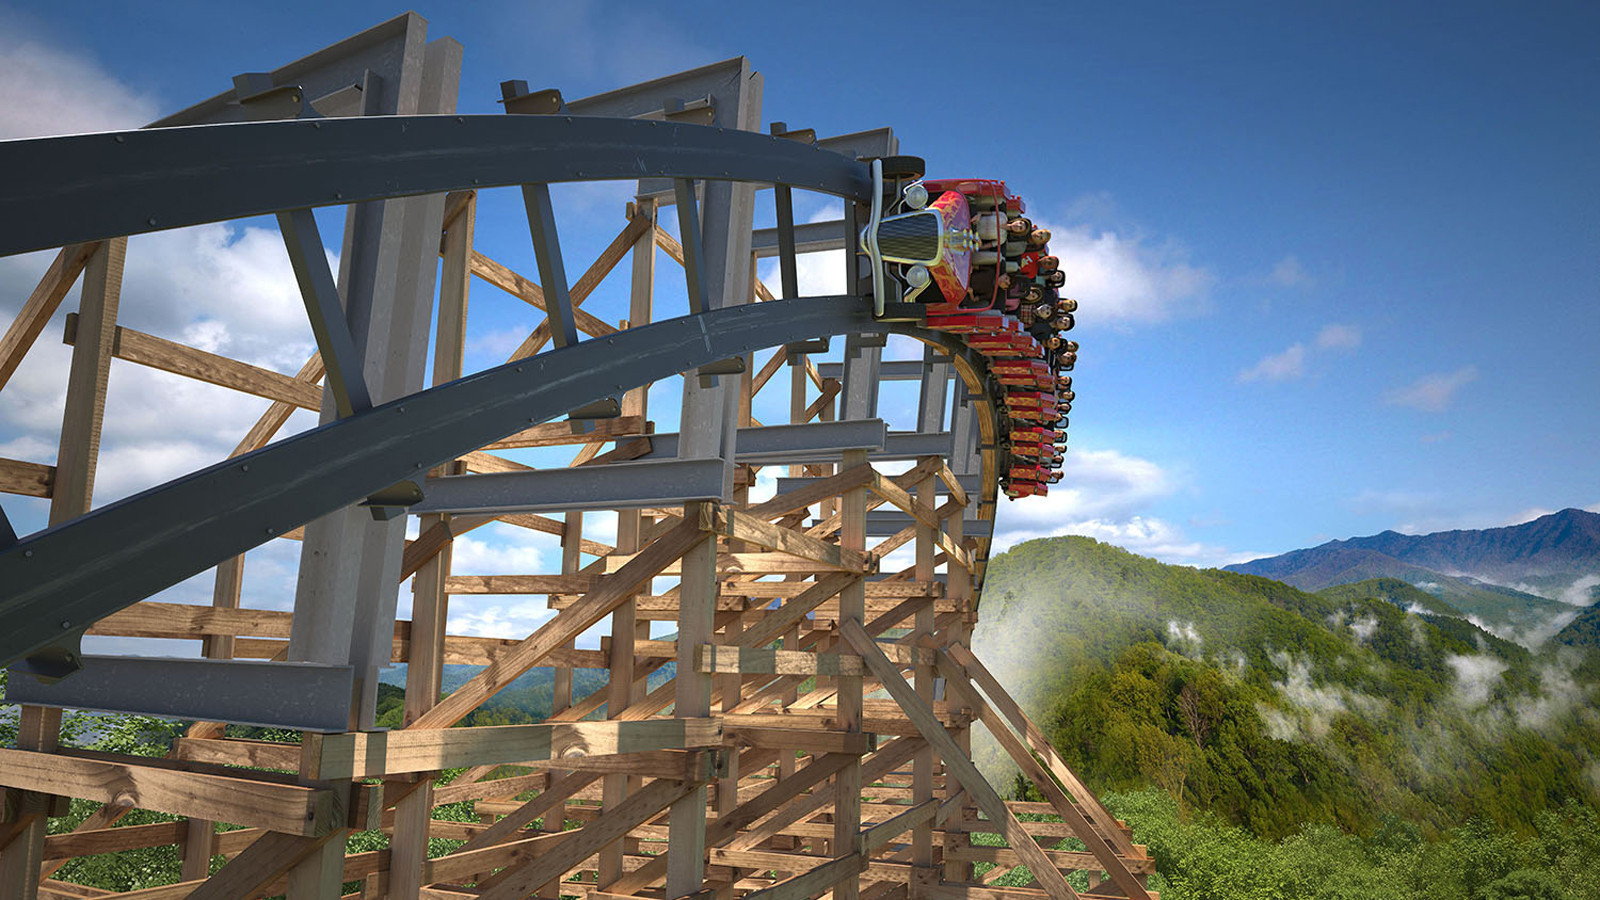 Top 16 for 2016: Best new rides coming to U.S. theme parks - LA Times